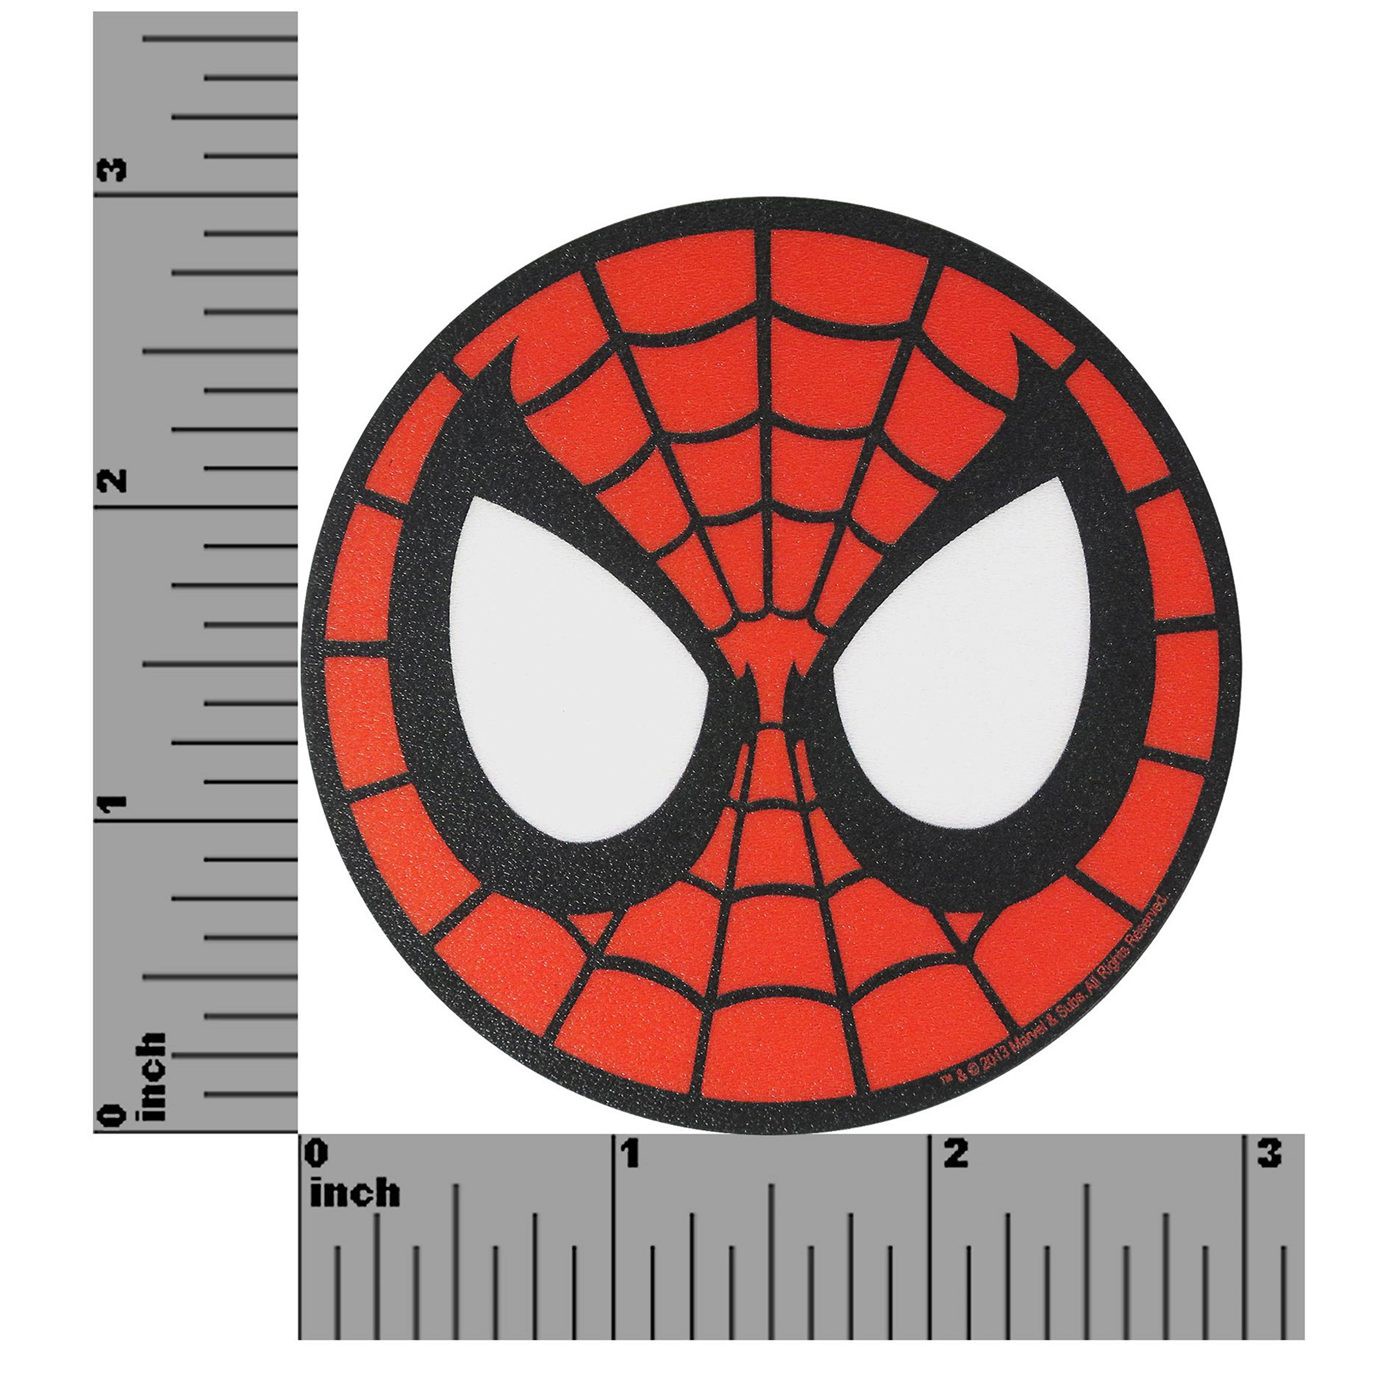 Spiderman Mask Chunky Magnet